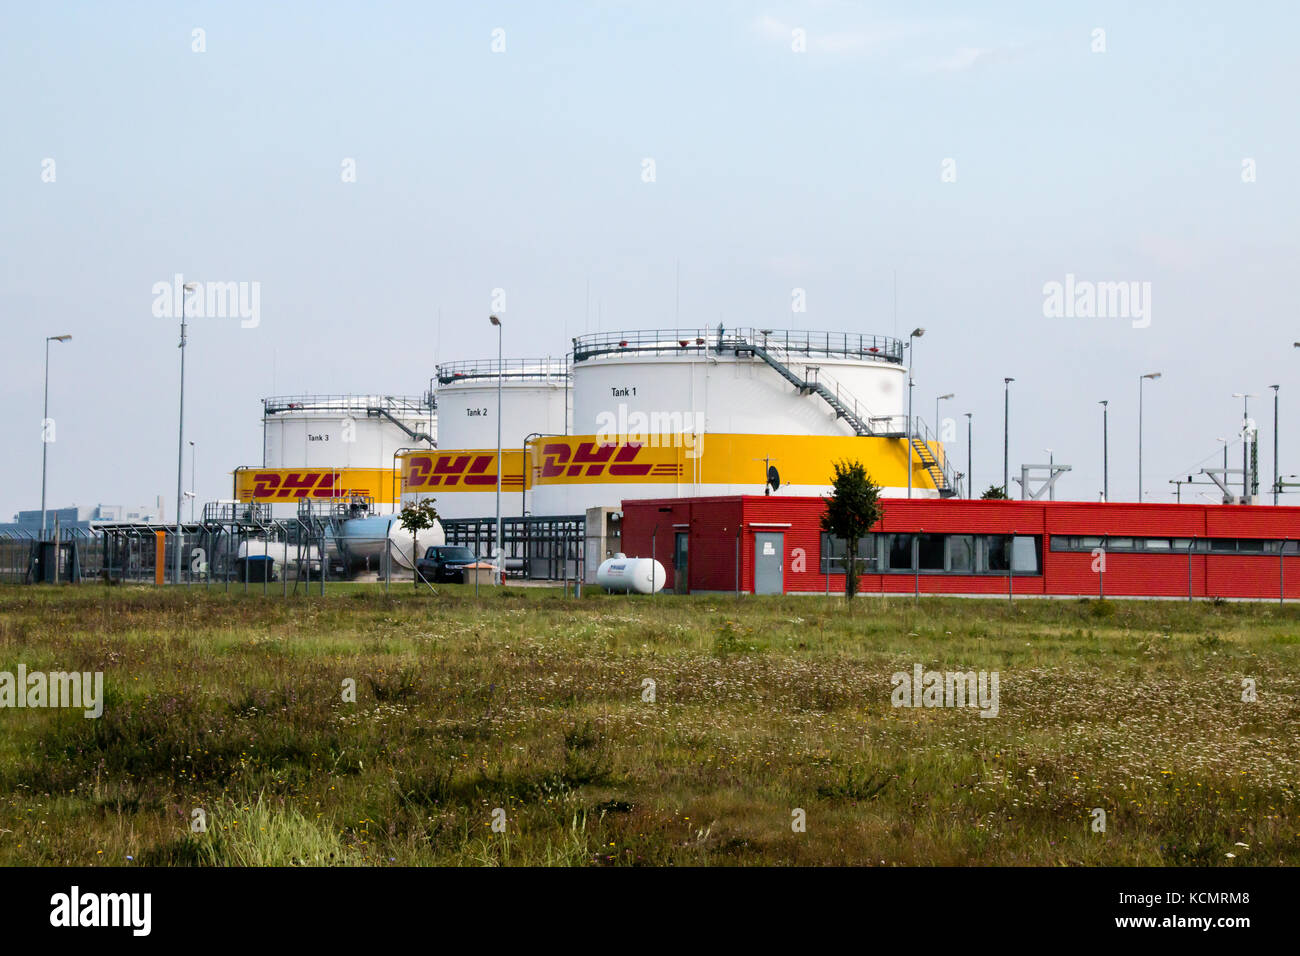 LEIPZIG, GERMANY - September 22, 2017: DHL tank warehouse for Aircraft gasoline at the airport Leipzig Halle. Stock Photo